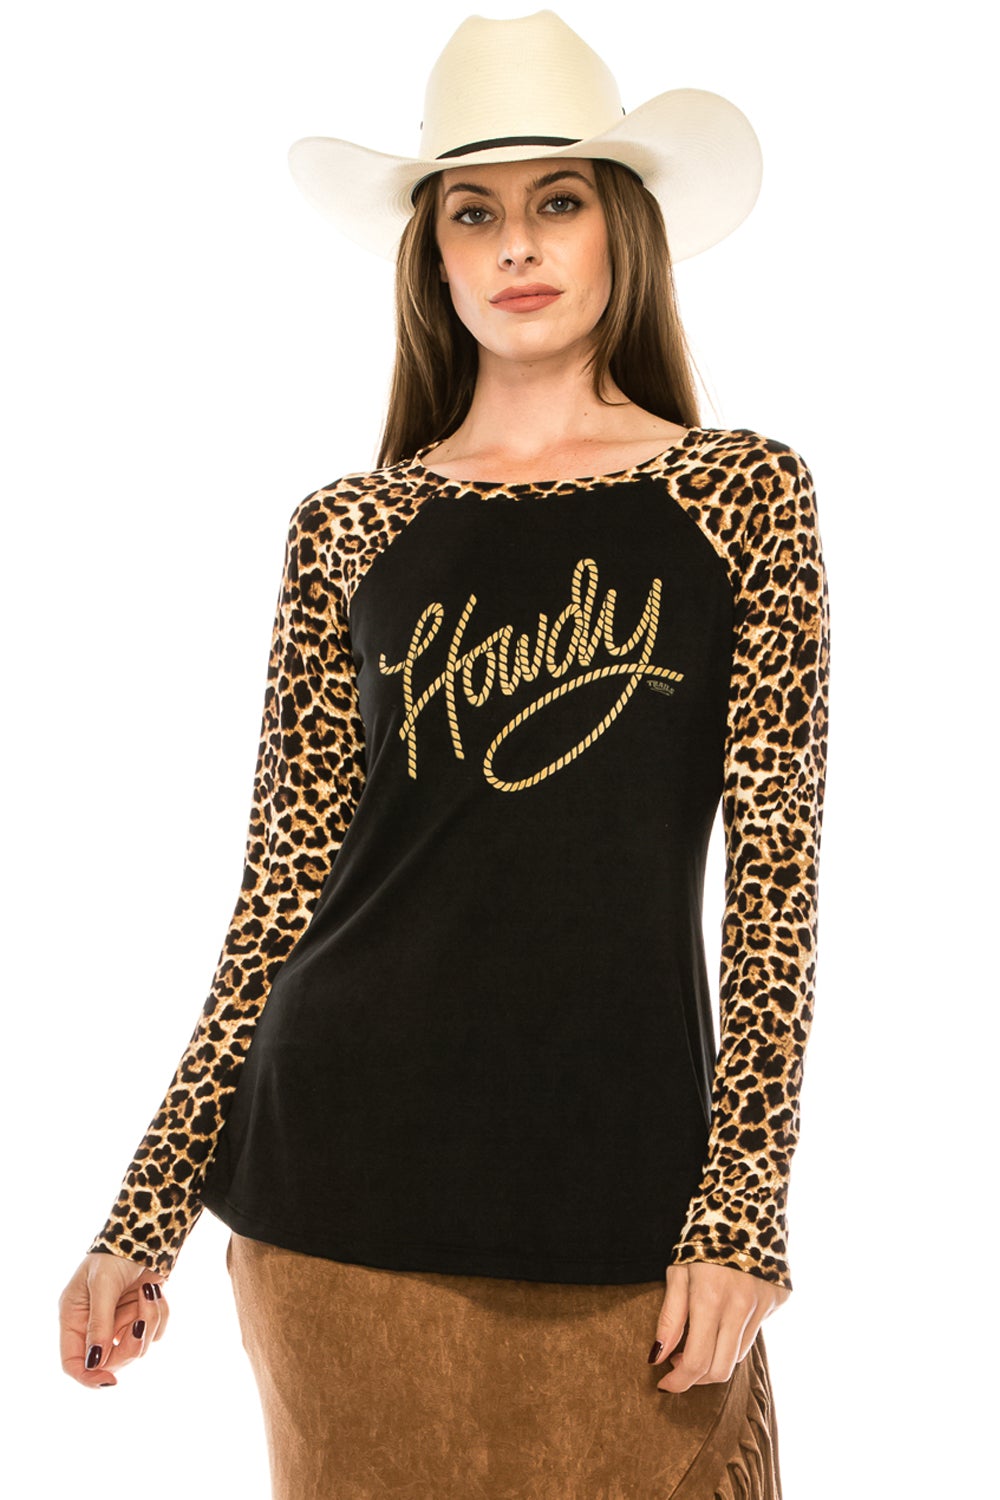 Howdy Leopard Raglan Shirt - ATTITUDE, bent, beth, bound, COUNTRY, COWGIRL, GIRL, hell, HOWDY, PLUS, rip, RODEO, SIZE, smooth, SUMMER, TANK, tennessee, TOP, TOPO, WESTERN - Shirts & Tops - Baha Ranch Western Wear